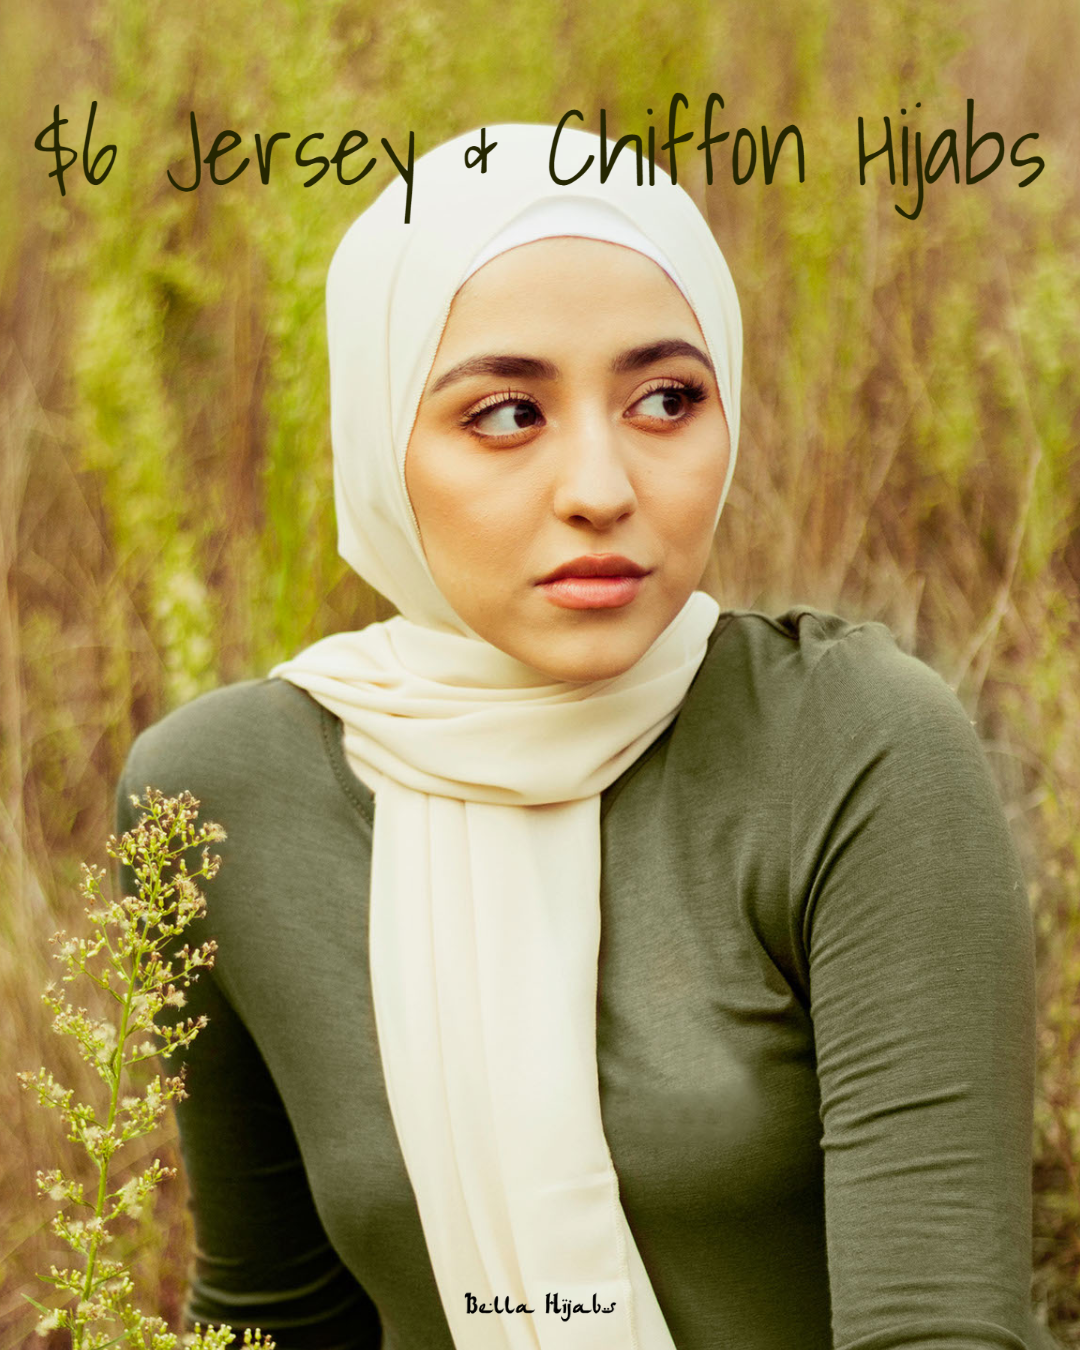 Shimmer Jersey Hijab - Turquoise